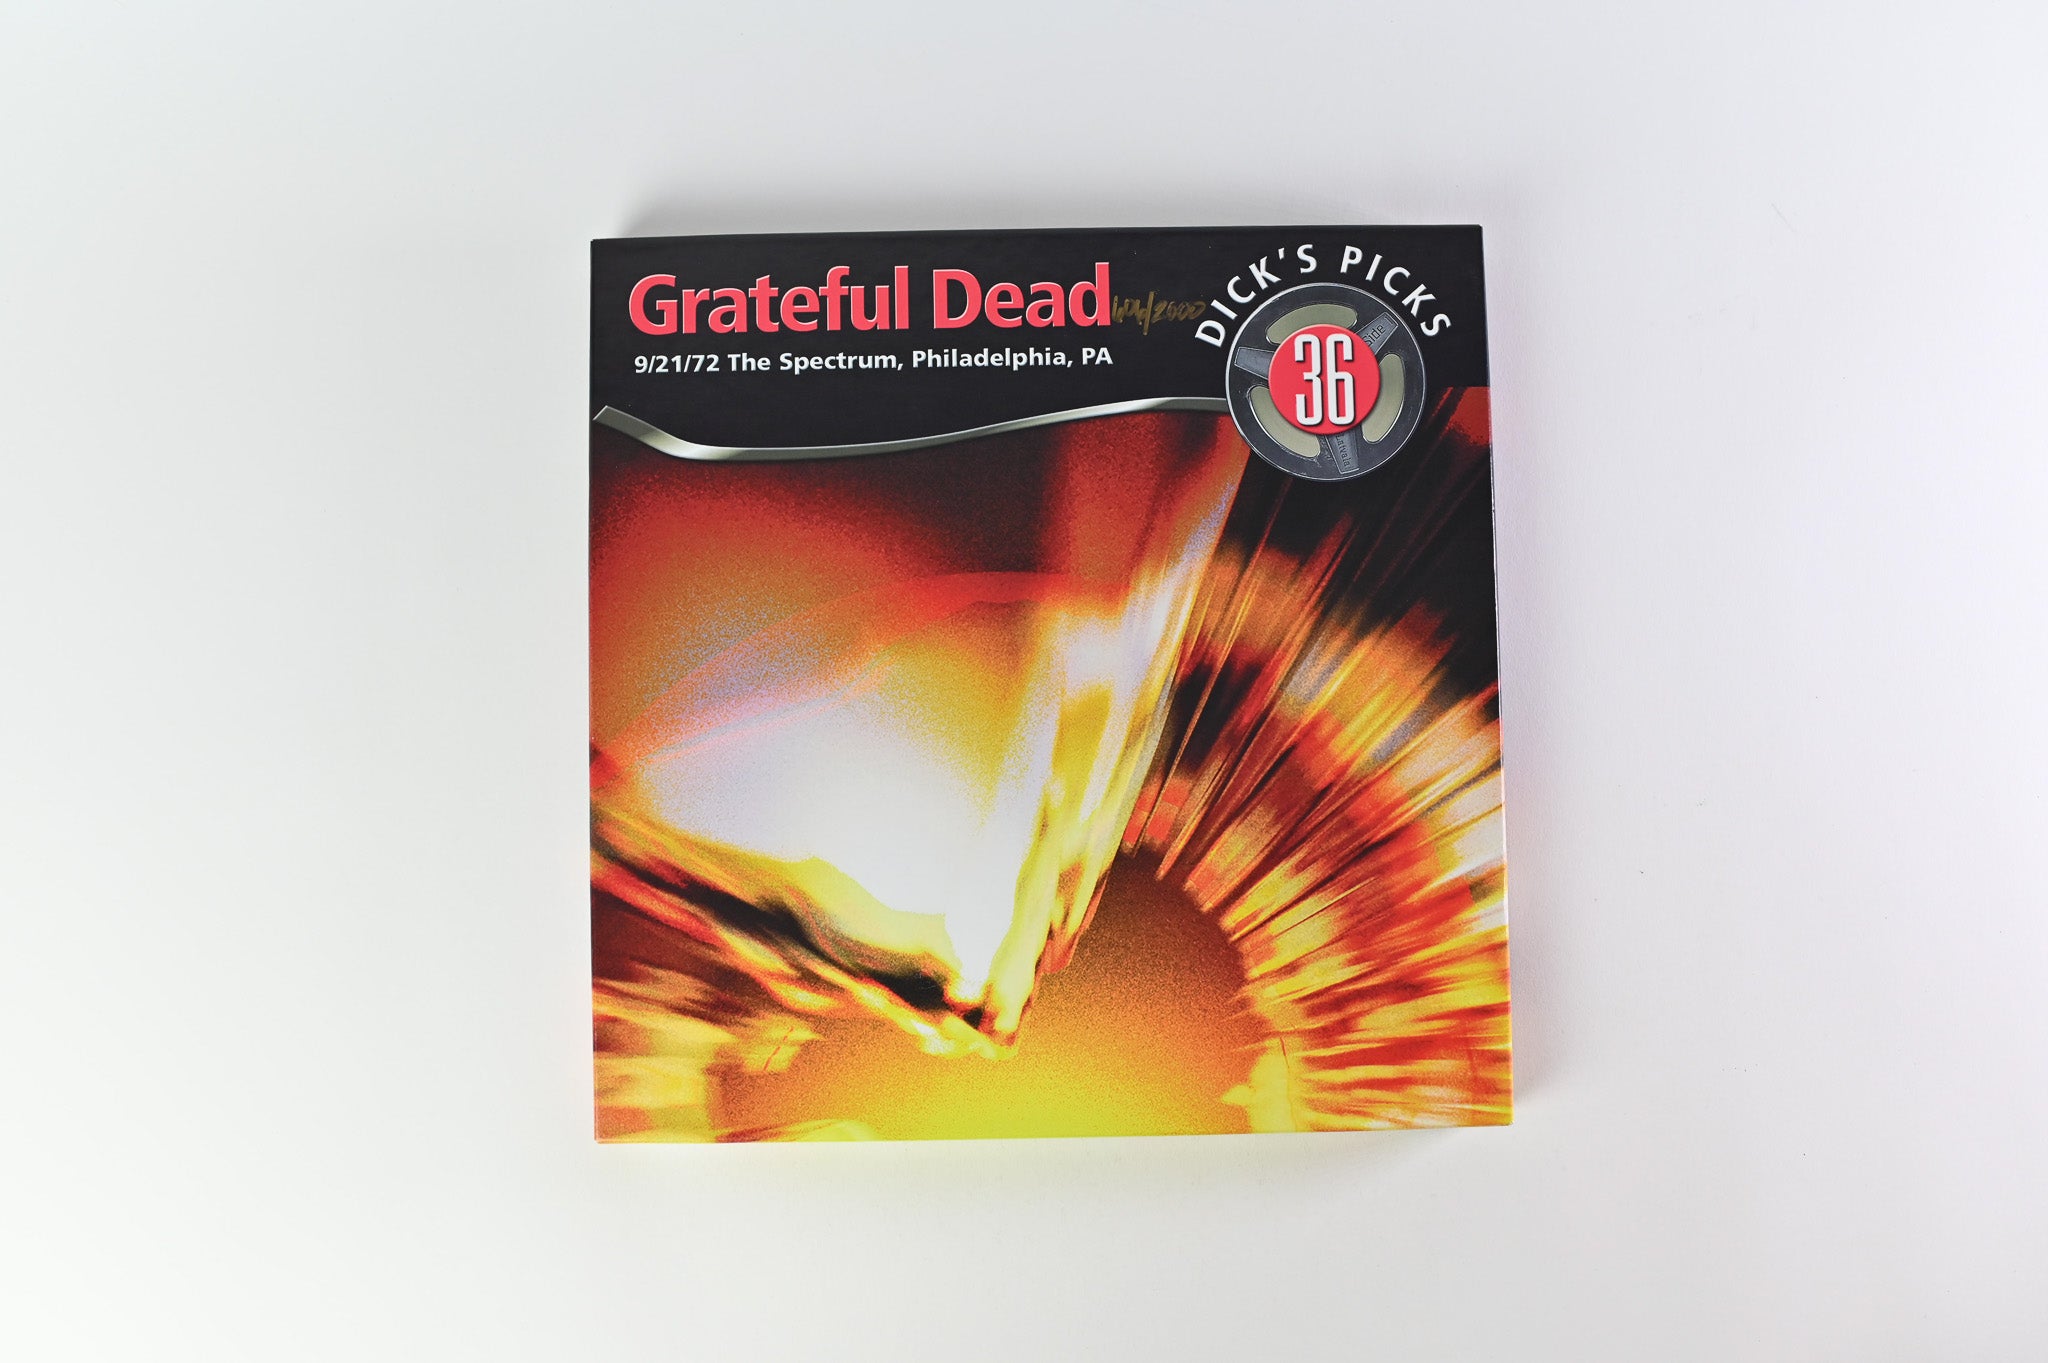 The Grateful Dead - Dick's Picks 36: 9/21/72 The Spectrum, Philadelphia, PA Limited Edition Numbered Box Set